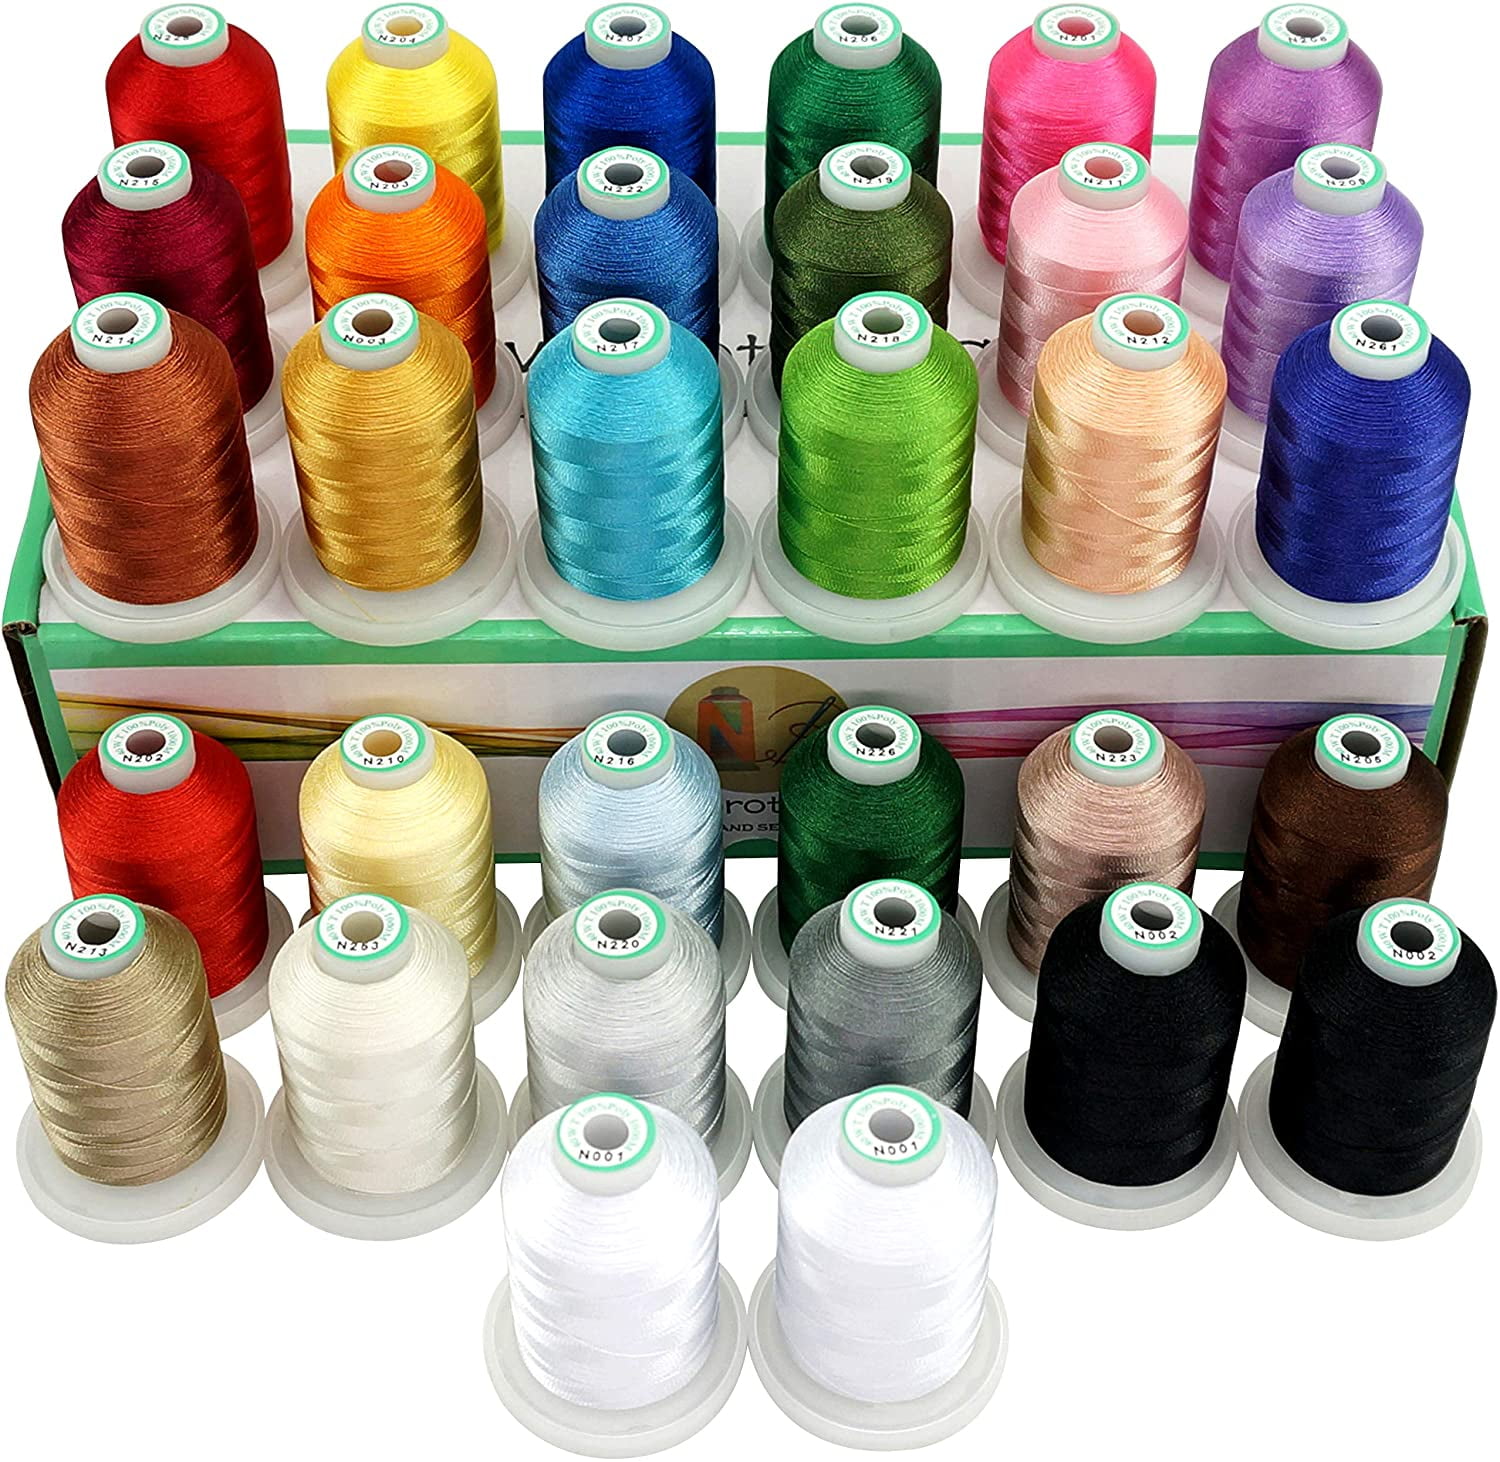 30 Assorted Colour Polyester Sewing Thread Spools 250 Yards Each, Wholesale  Price, Sewing Threads, Machine Threads, Poly Thread 